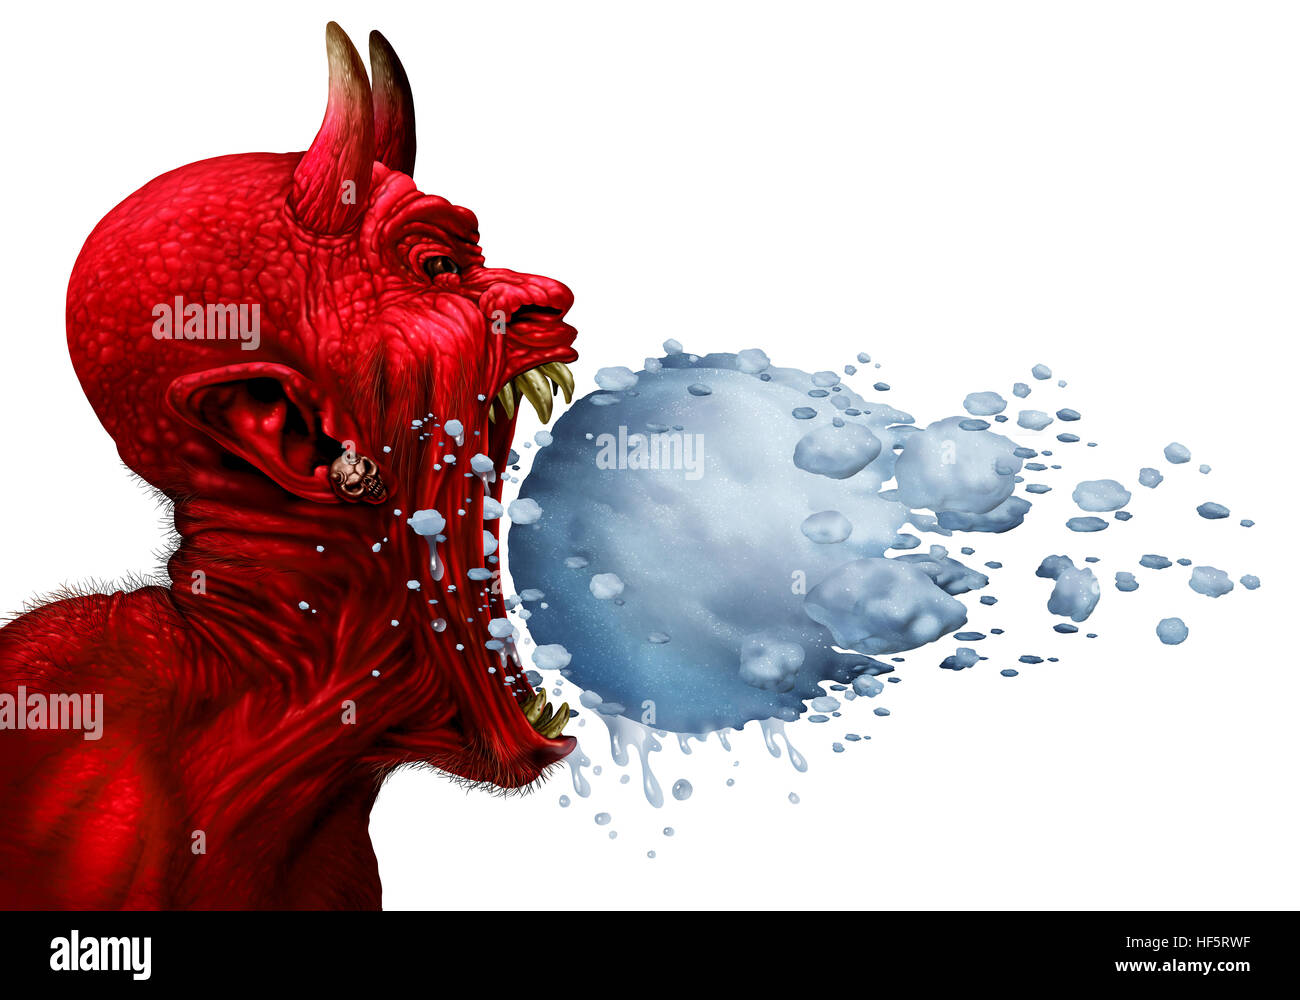 Devil in winter as a red demon or monster with in an open mouth having a frozen and melting snowball heading towards the character as a metaphor for h Stock Photo